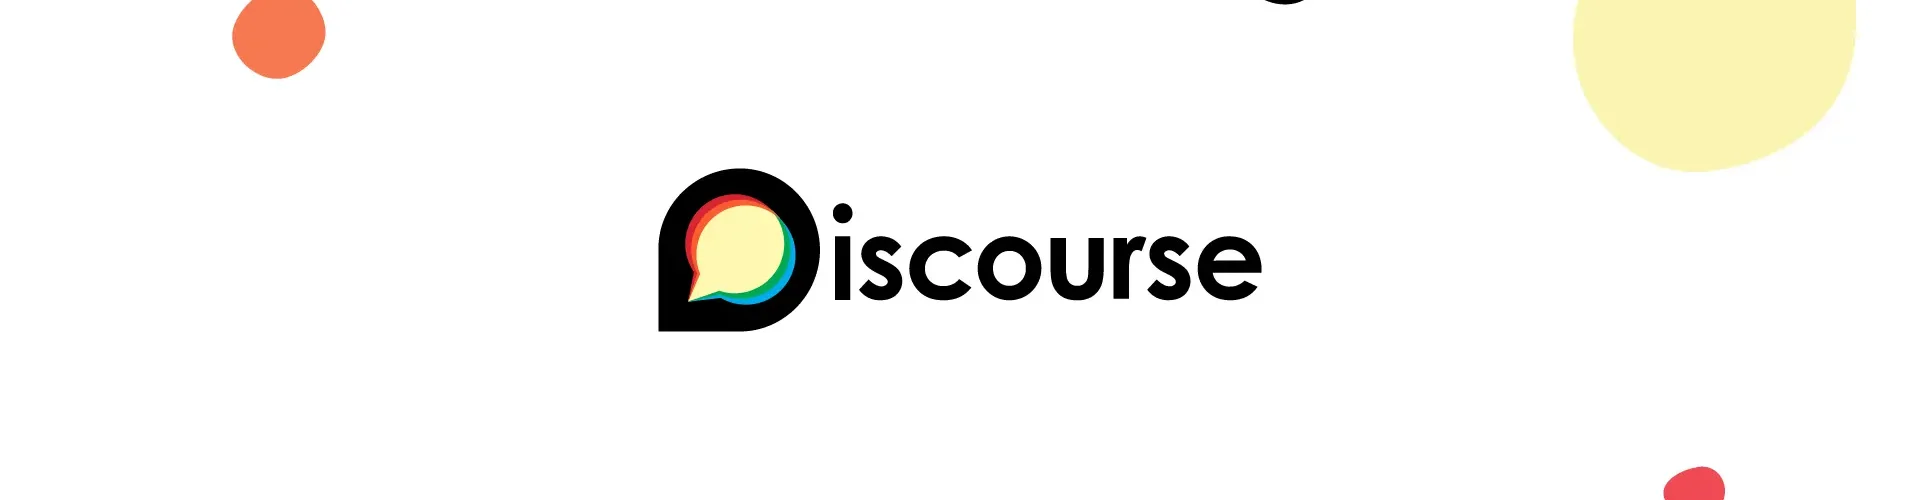 discourse interview with Sarah Hawk